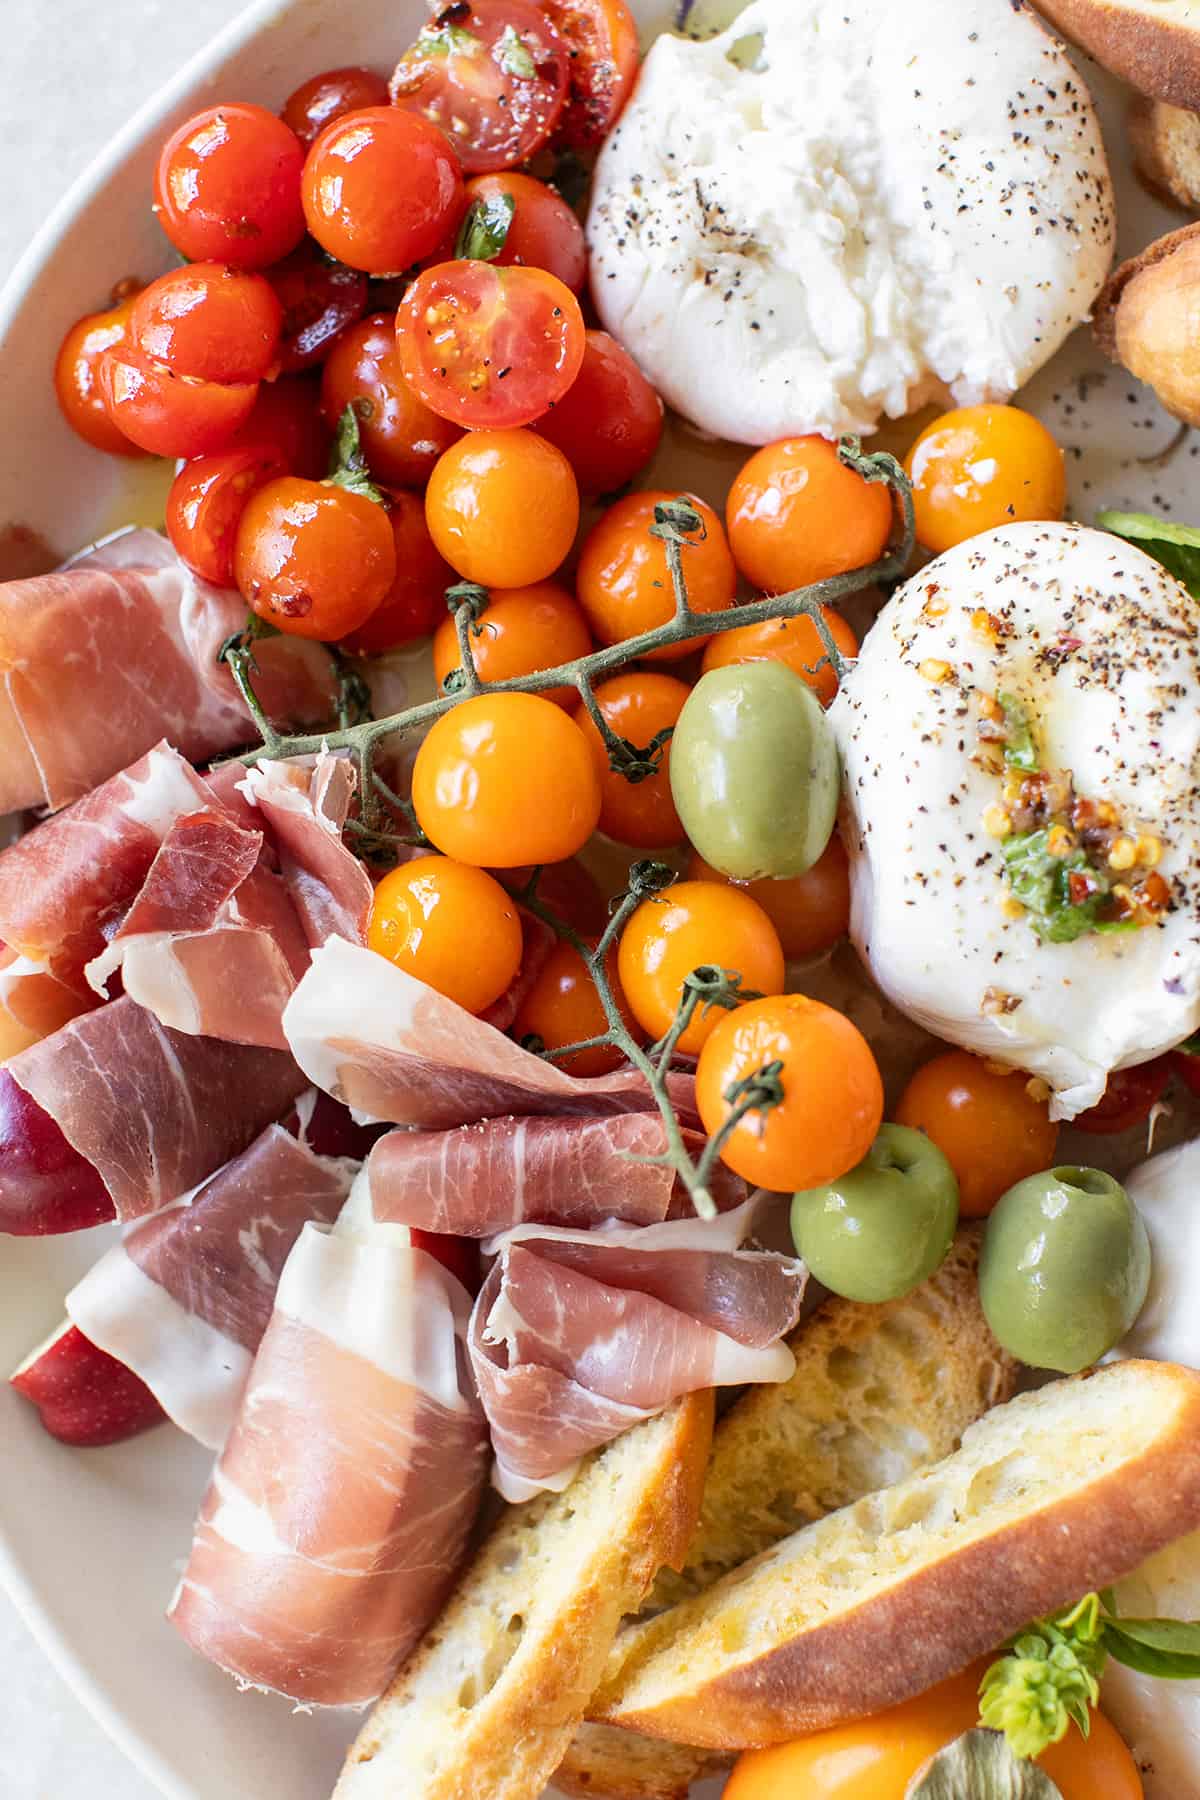 Easy burrata platter with crostini, crackers, fresh burrata, and fruit wrapped in prosciutto.